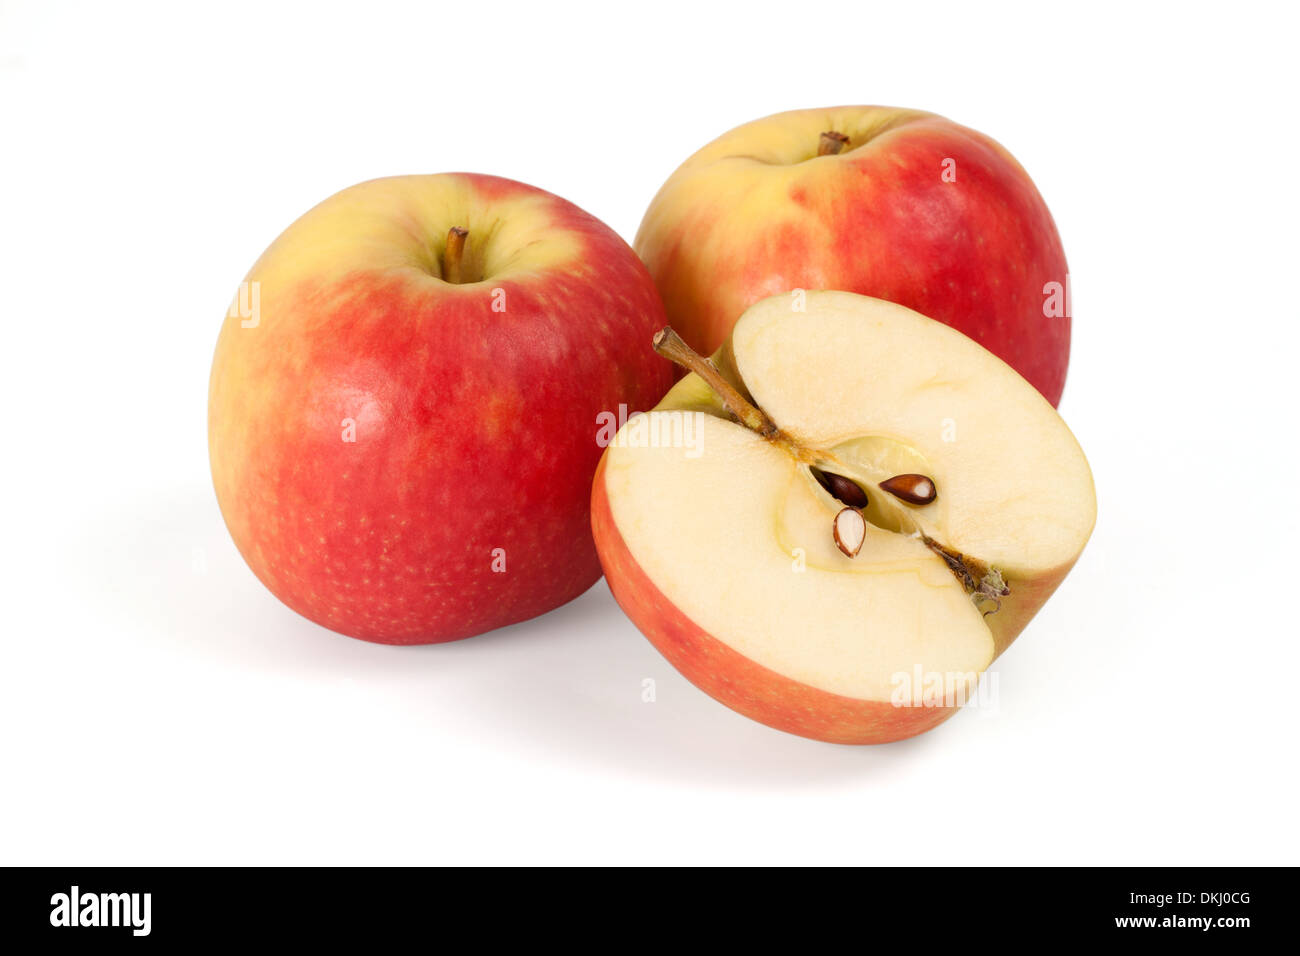 Two apples and half apple sliced on white background Stock Photo